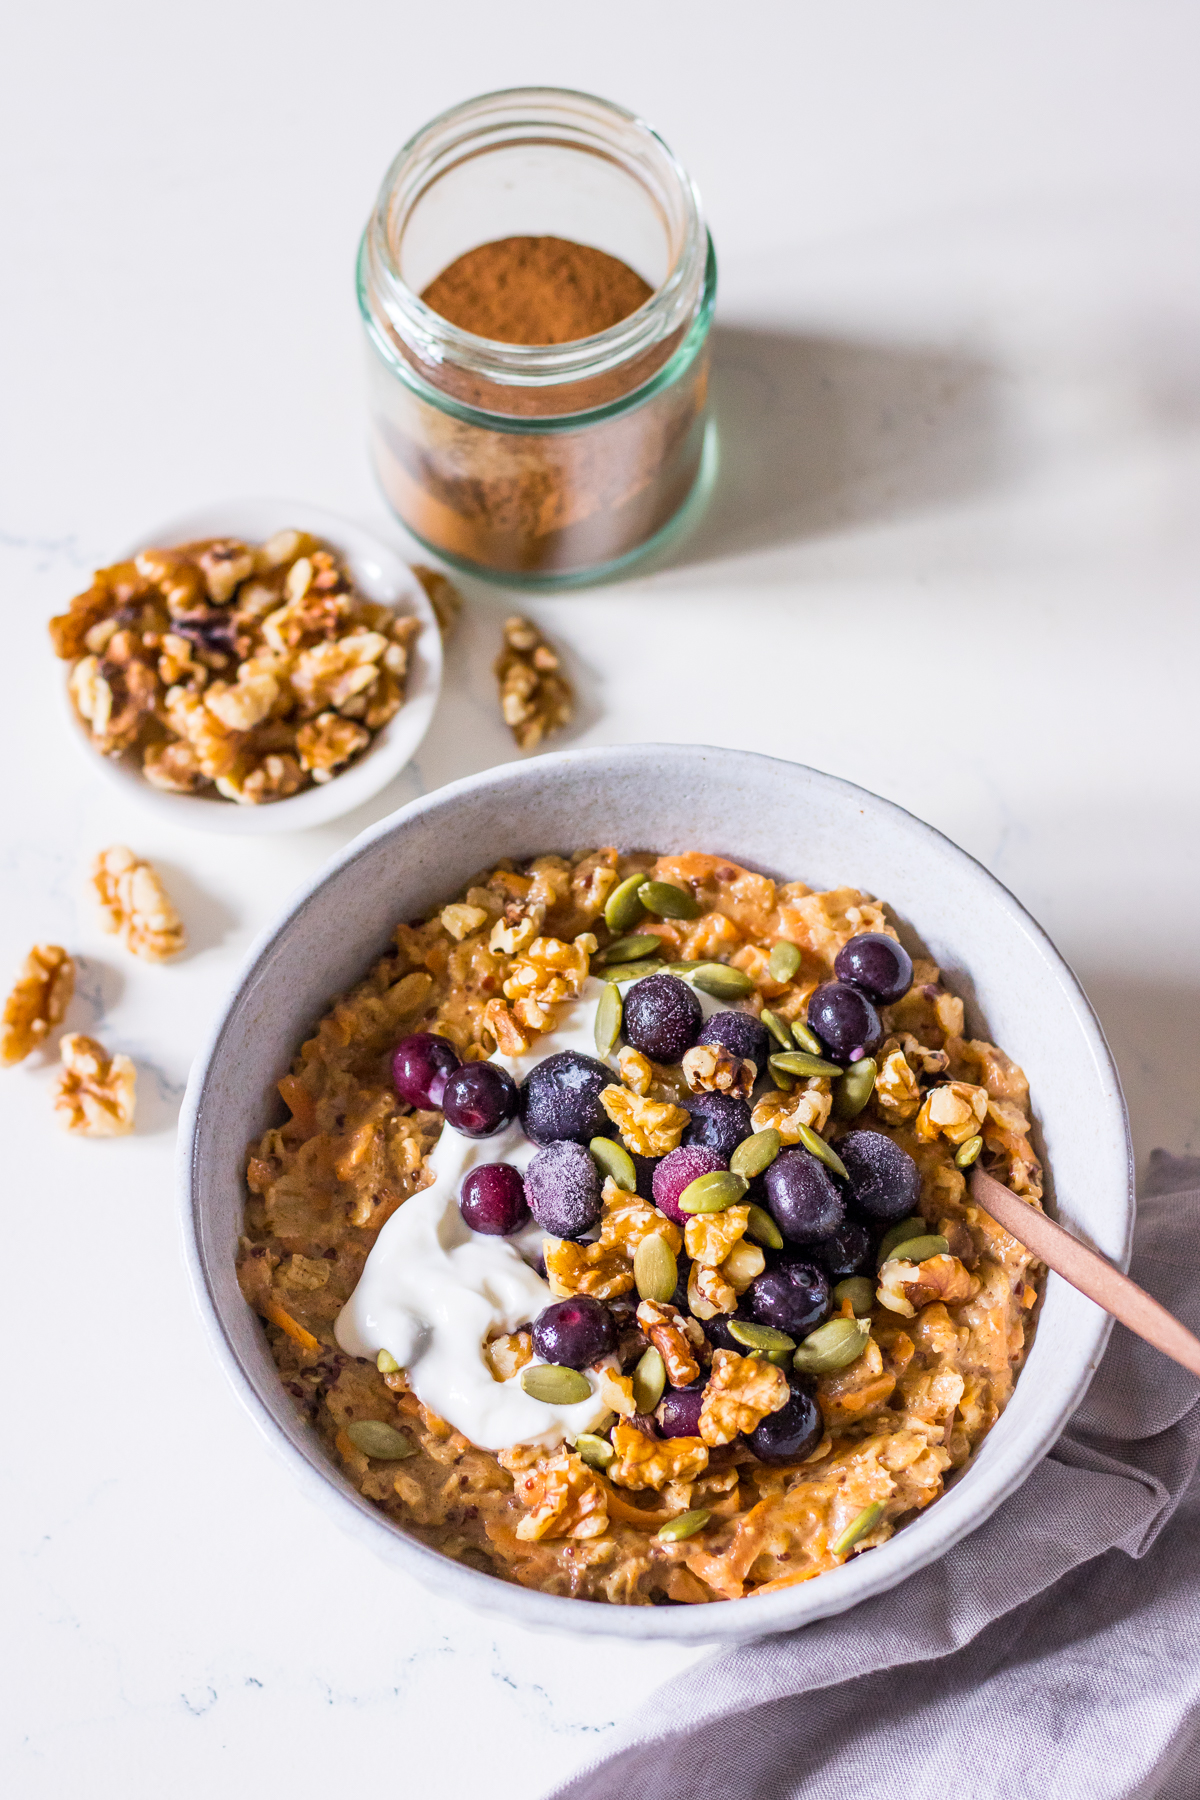 A bowl of carrot oatmeal with berries and walnuts, with walnuts scattered around the bowl